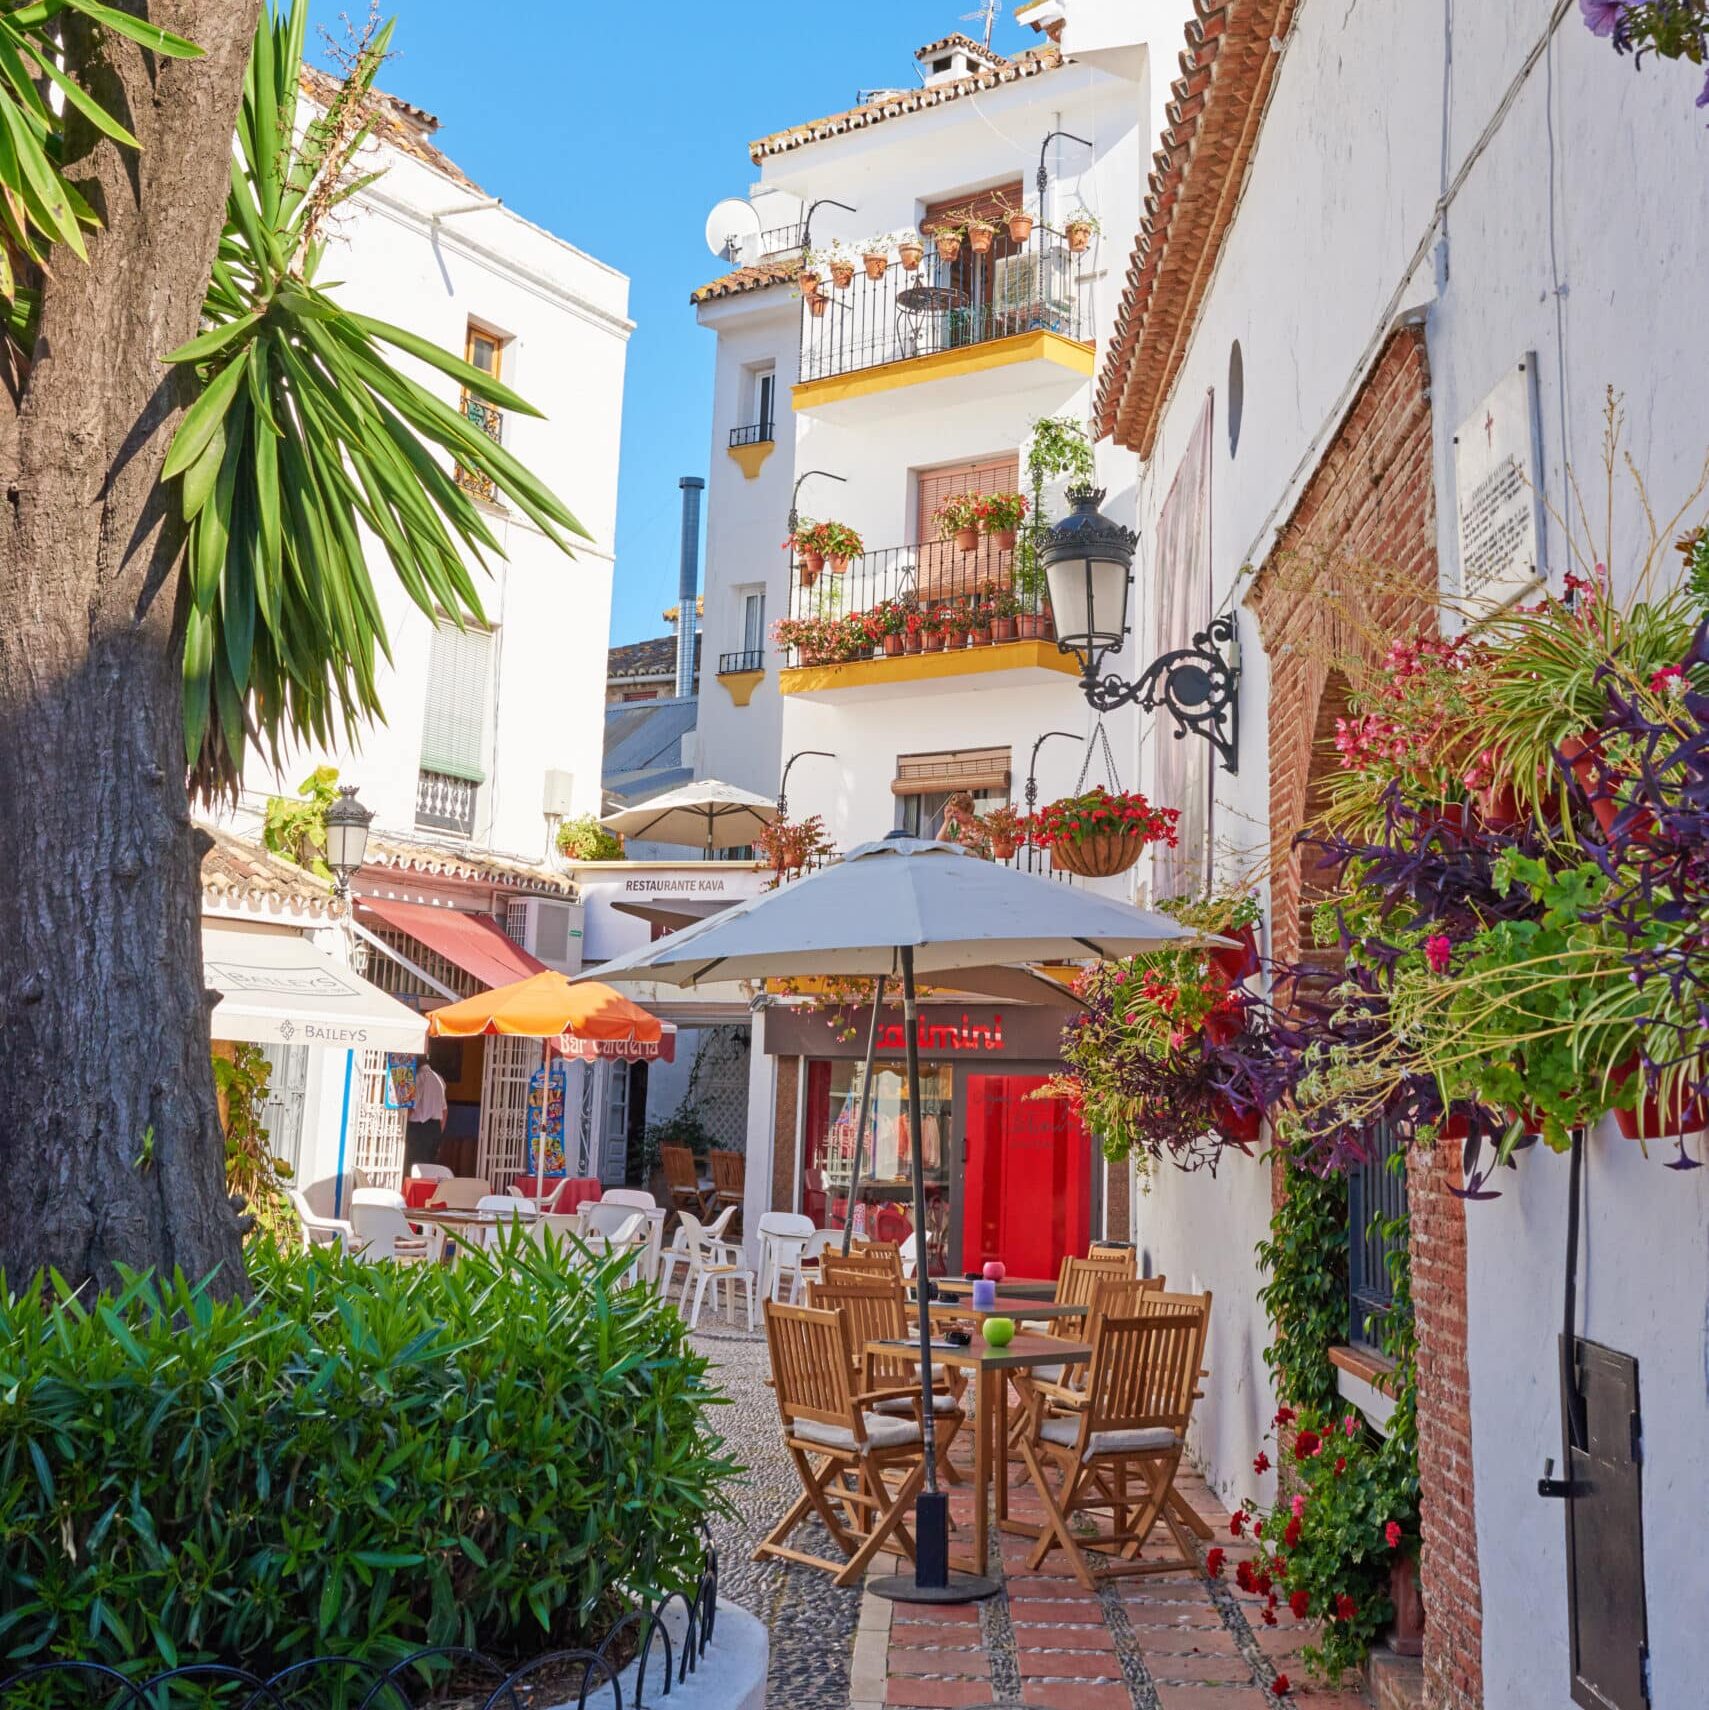 The beautiful city of Marbella, Andalusia, Spain